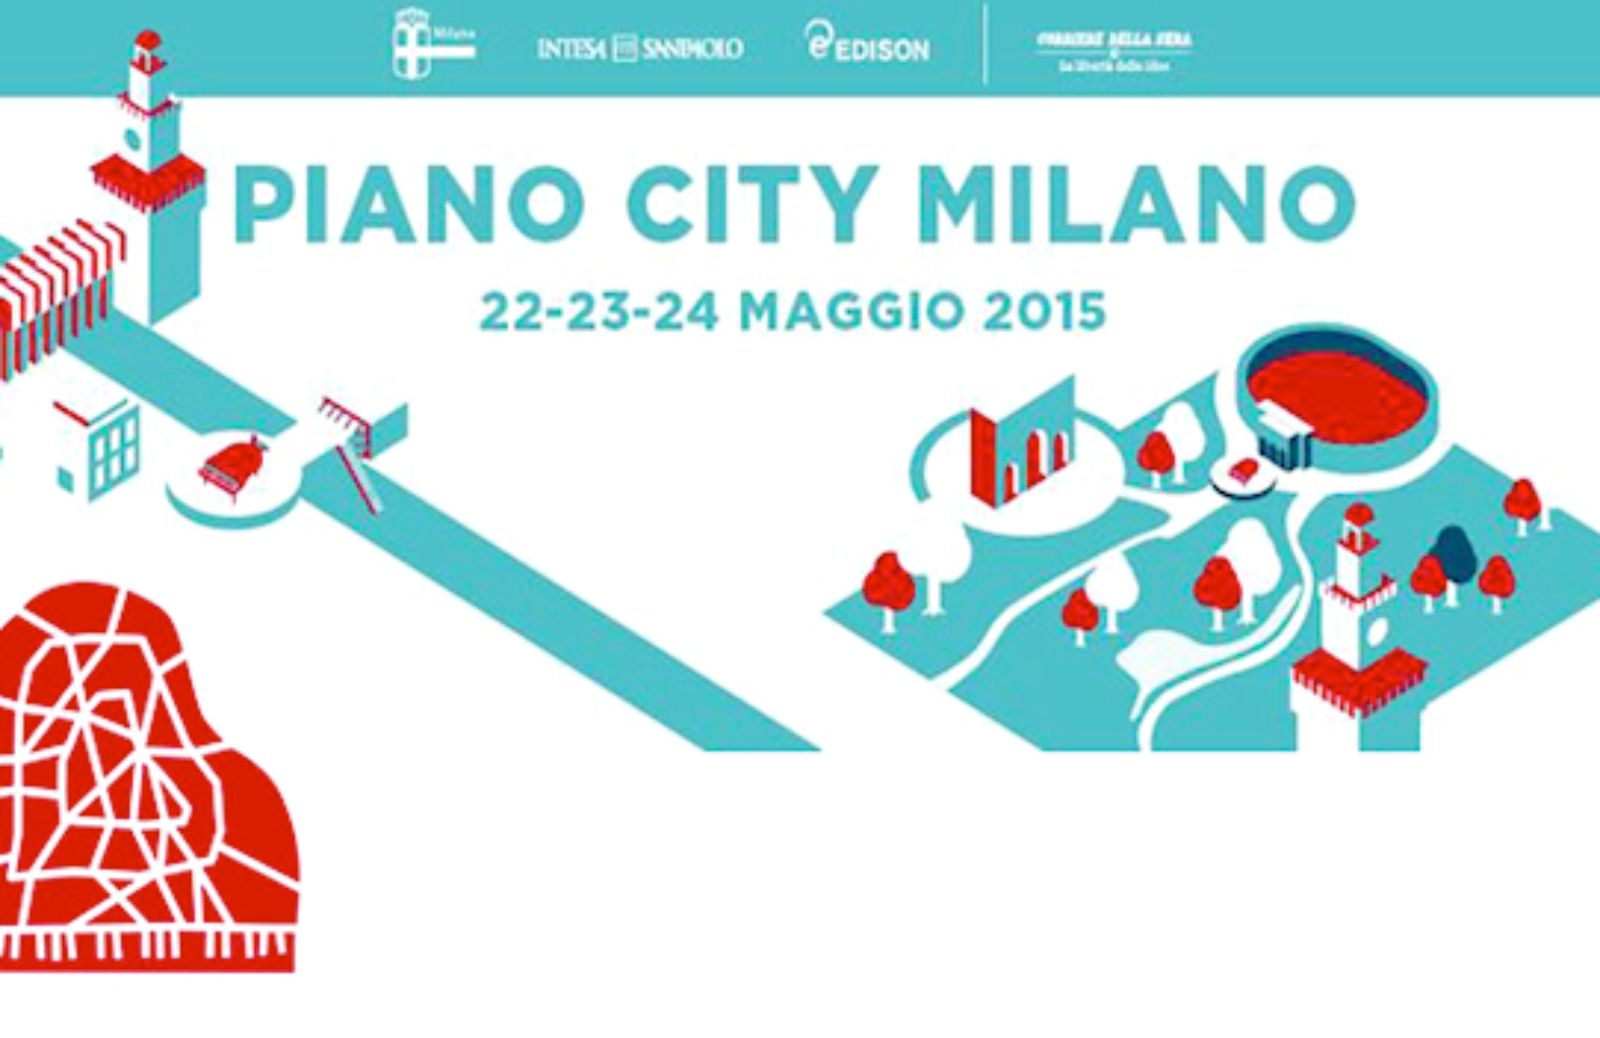 A Milano PianoCity 2015 speciale kids